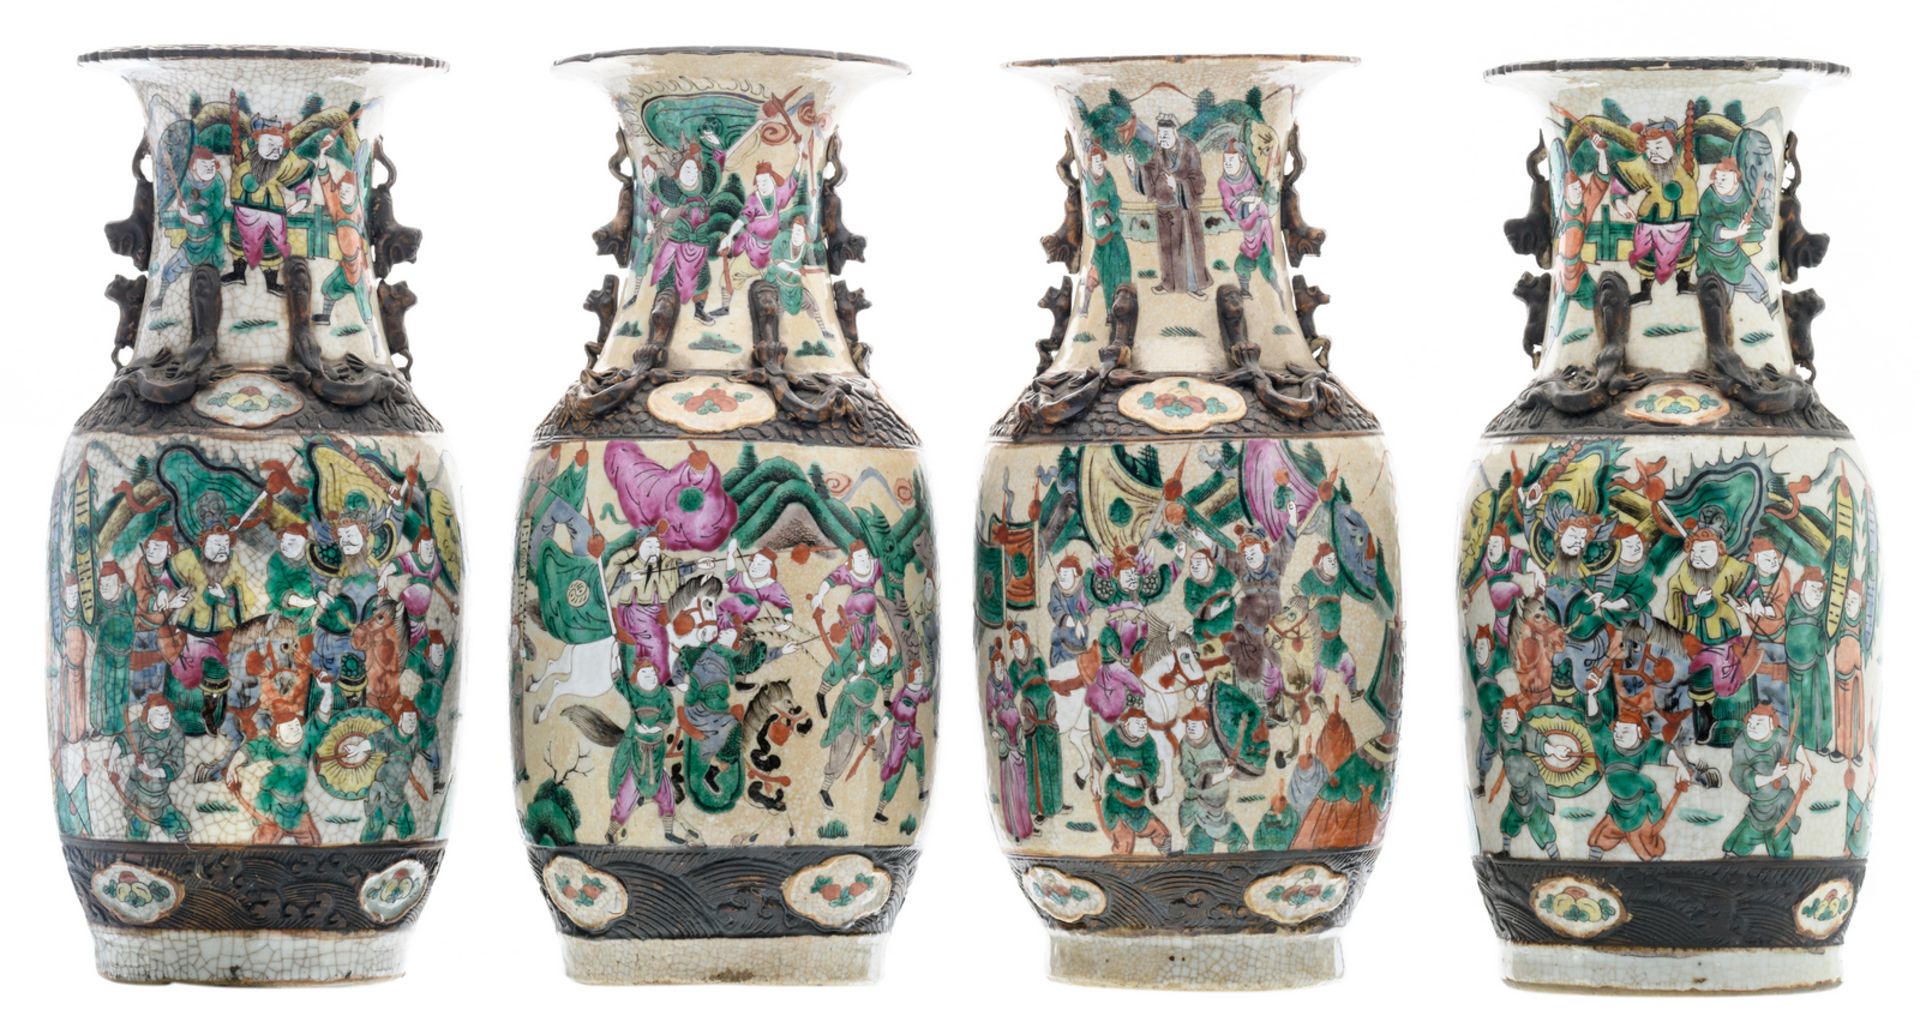 A pair of Chinese polychrome decorated stoneware vases with a battle scene, marked, about 1900;